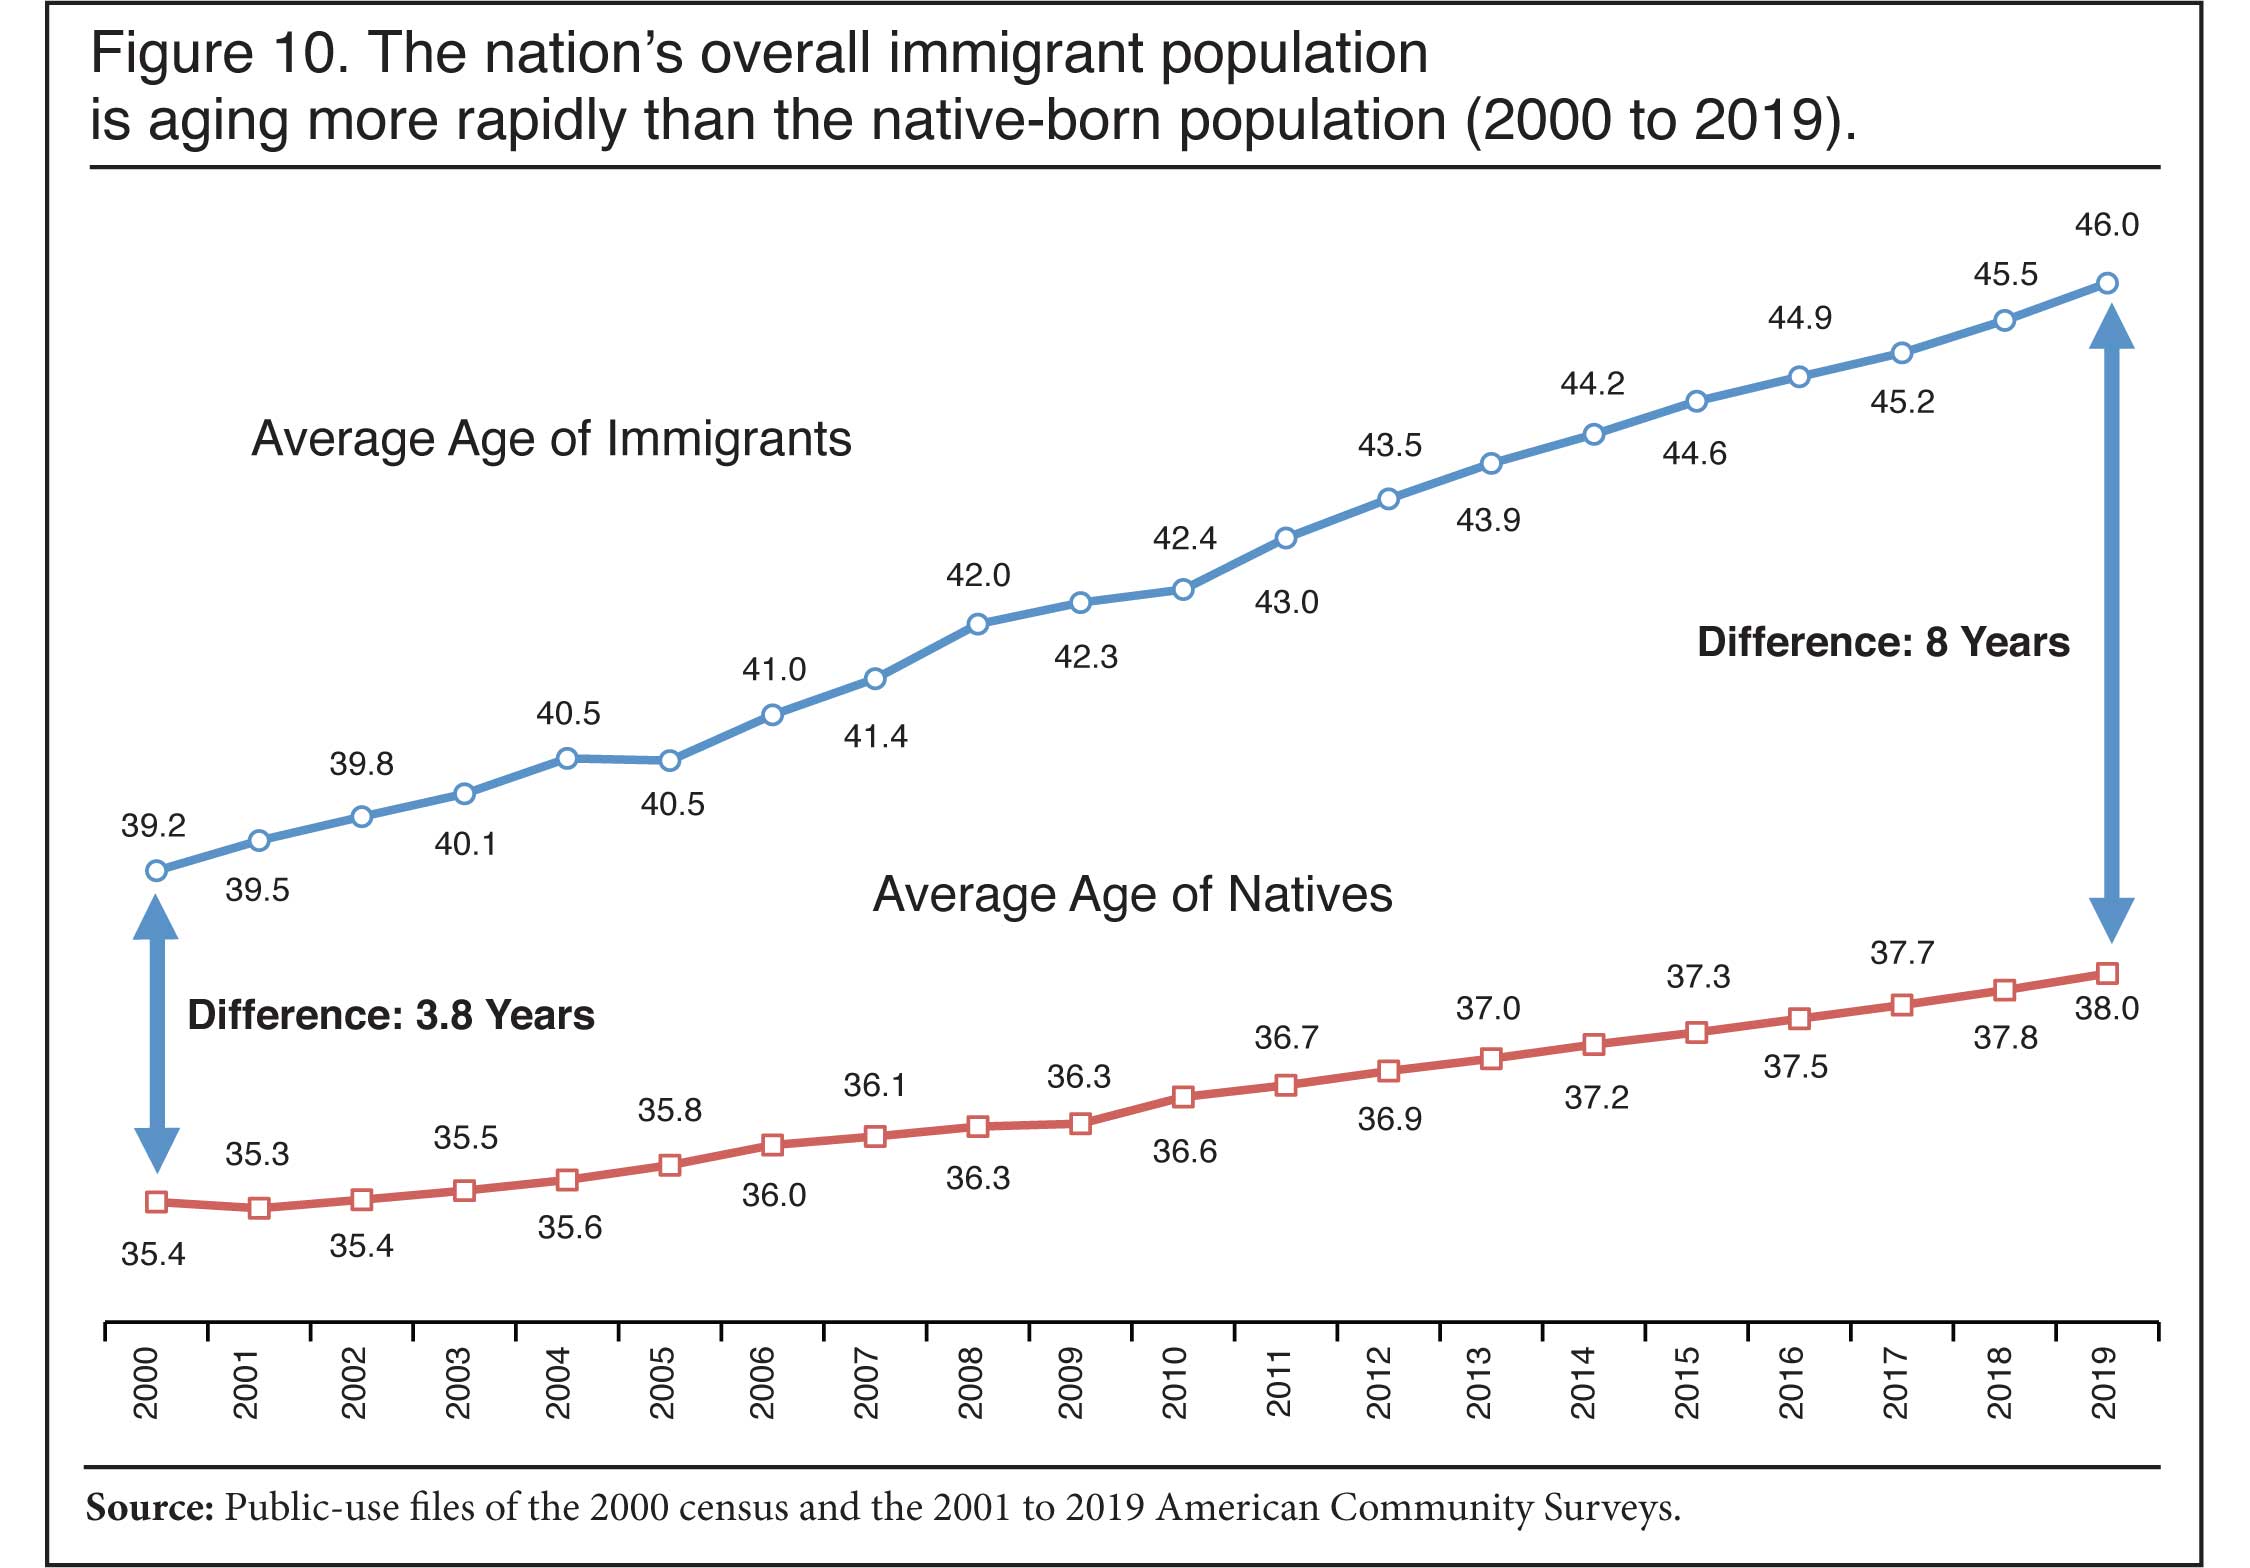 Graph: The nation's overall immigrant population is aging more rapidly than the native born population (2000 to 2019)